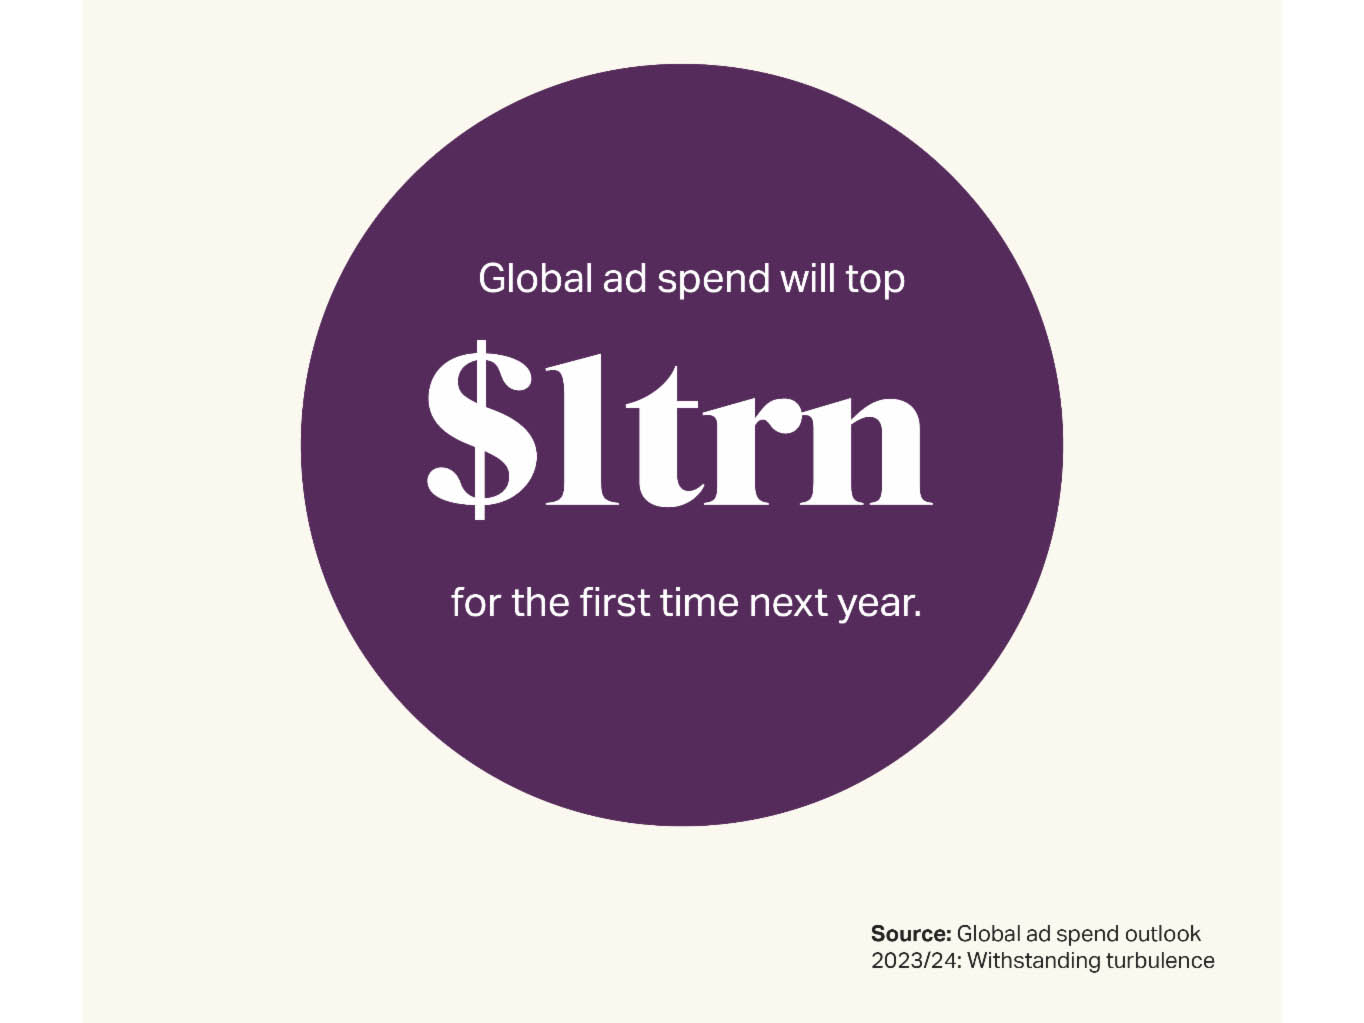 Global ad spend to top $1trn for first time next year, as per WARC forecast